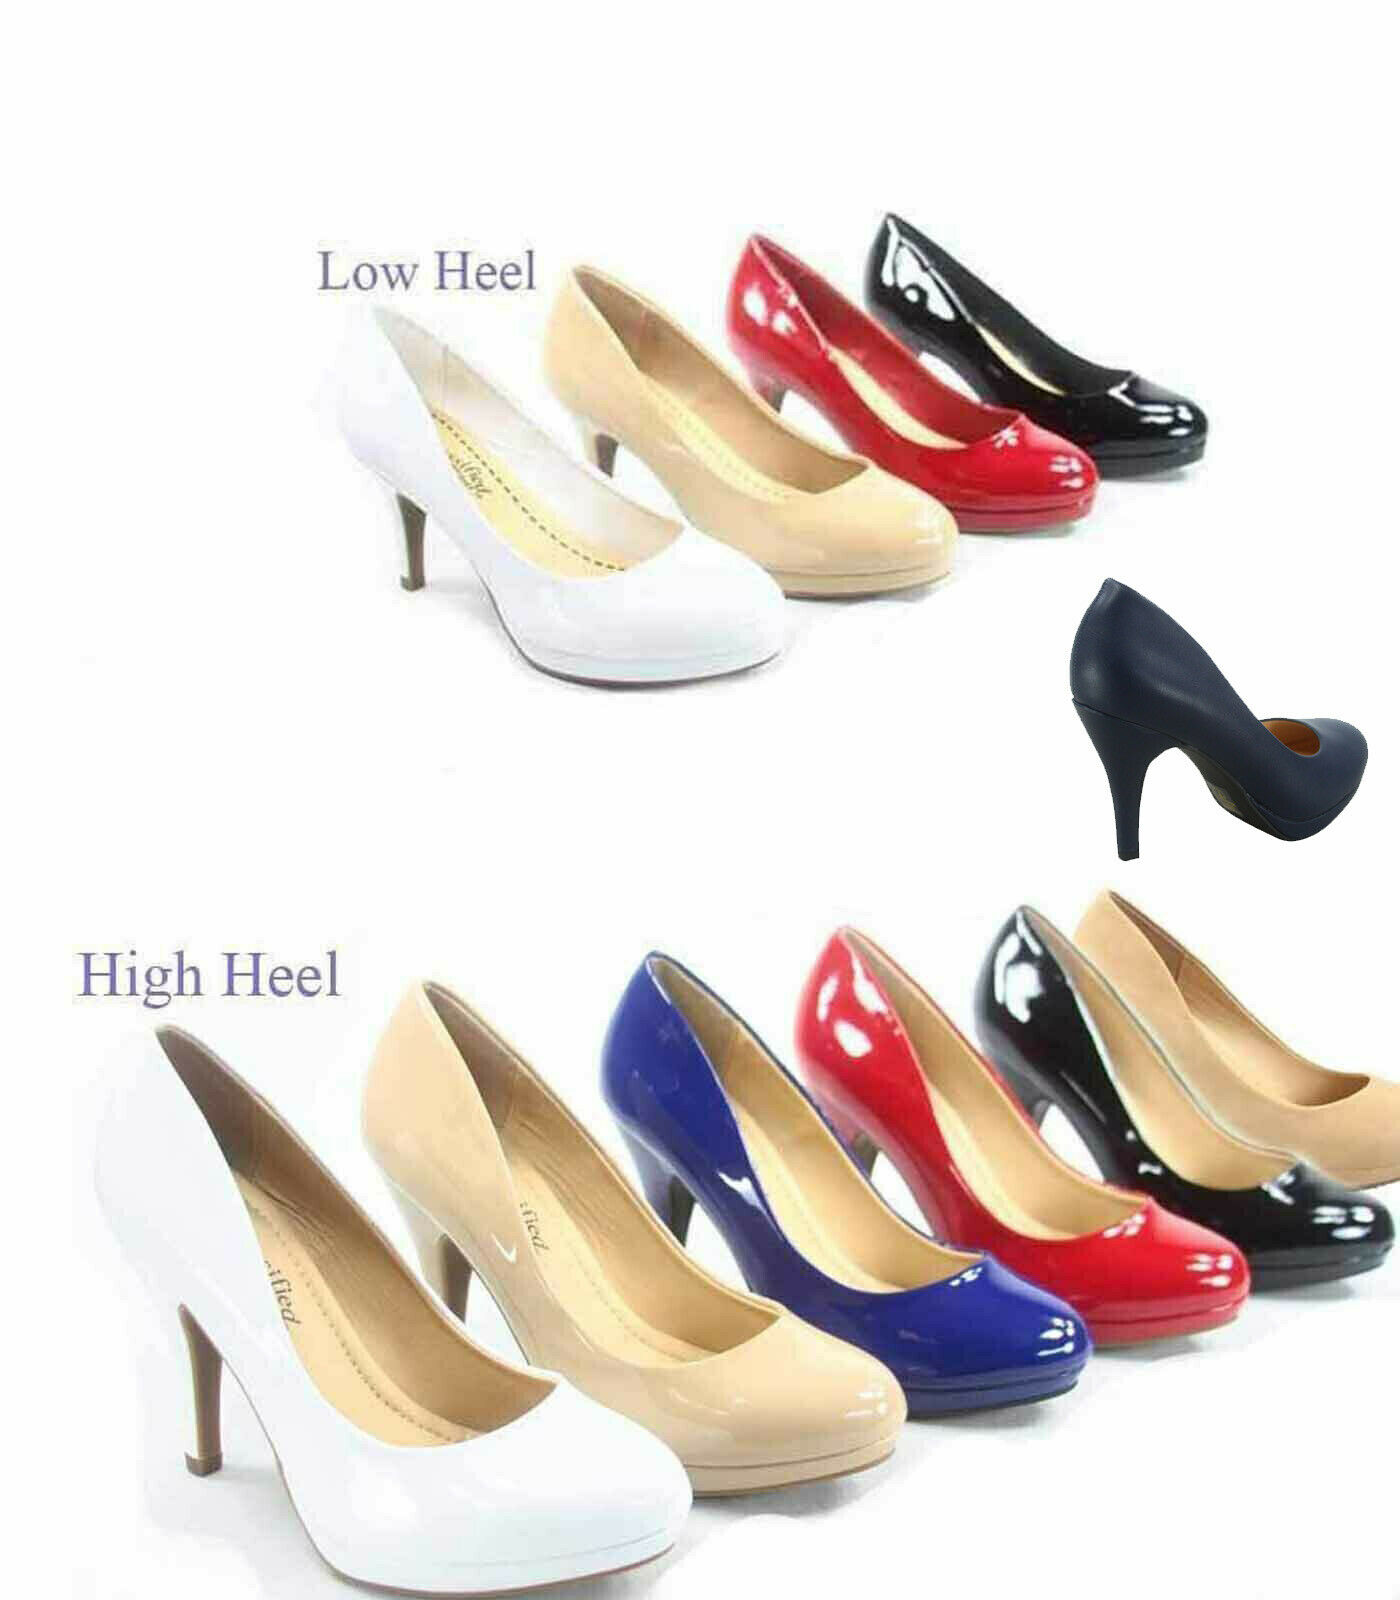 Women's Classic Comfort Round Toe Low High Heel Office Pump Shoes Size 5.5 - 11